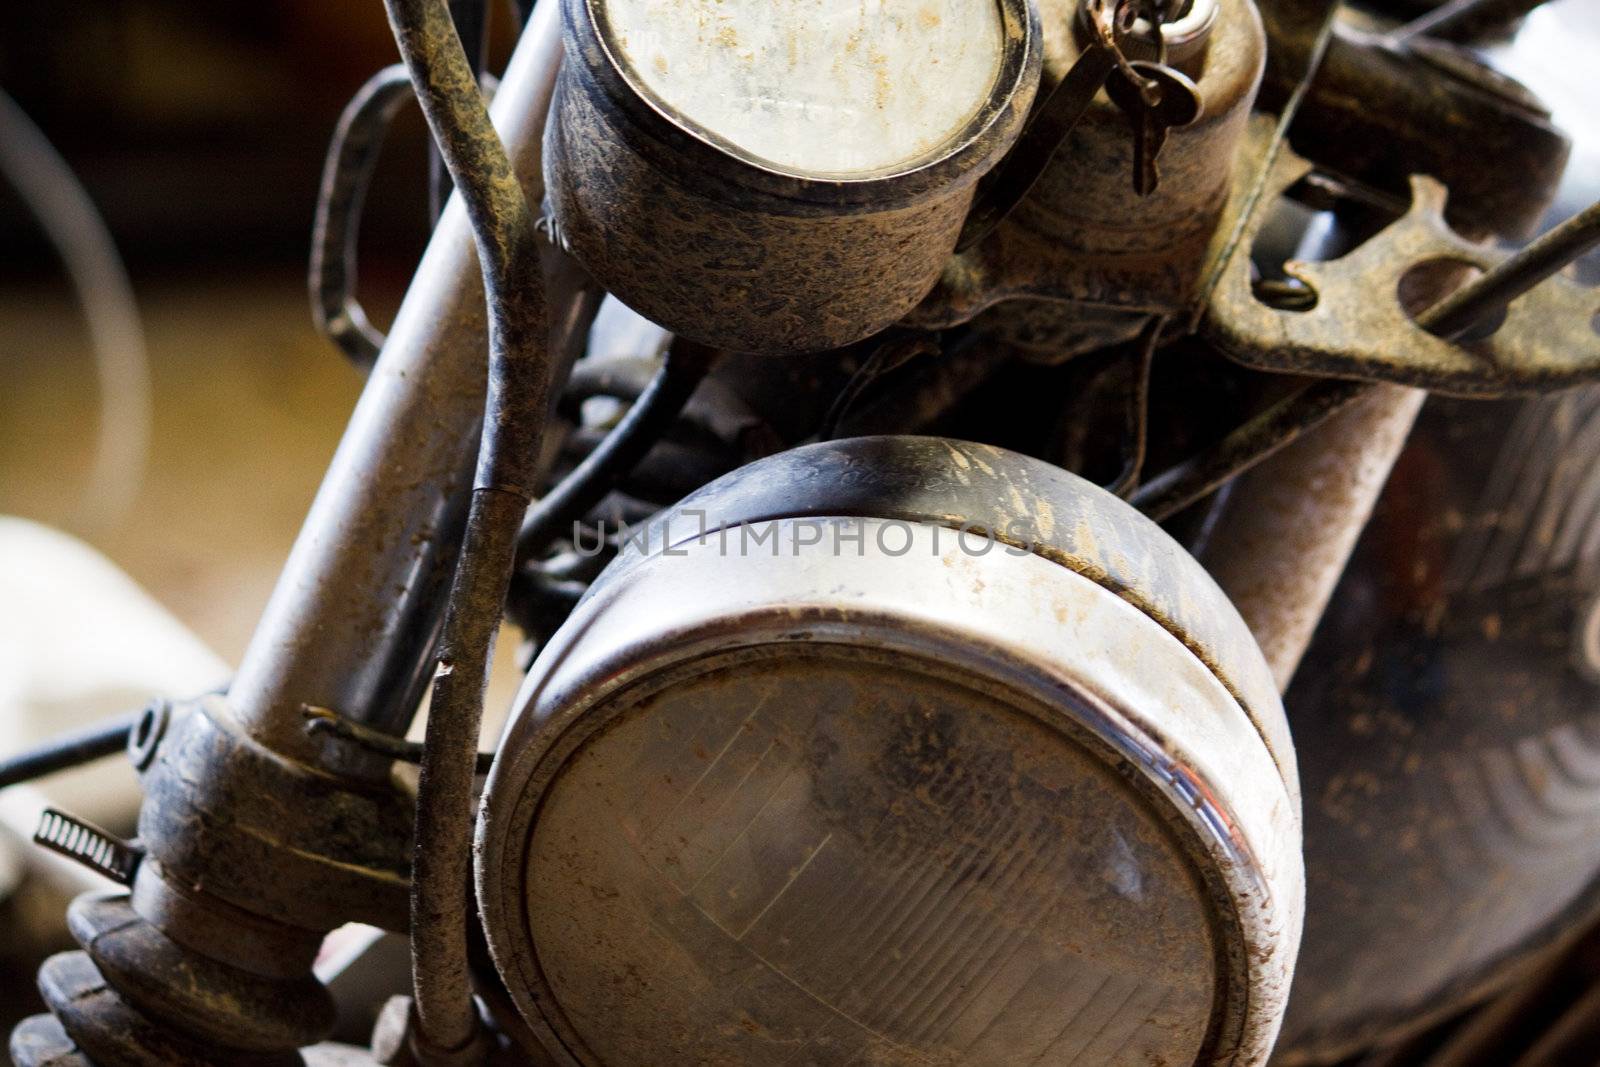 Image of an old motorbike with the aging signs 